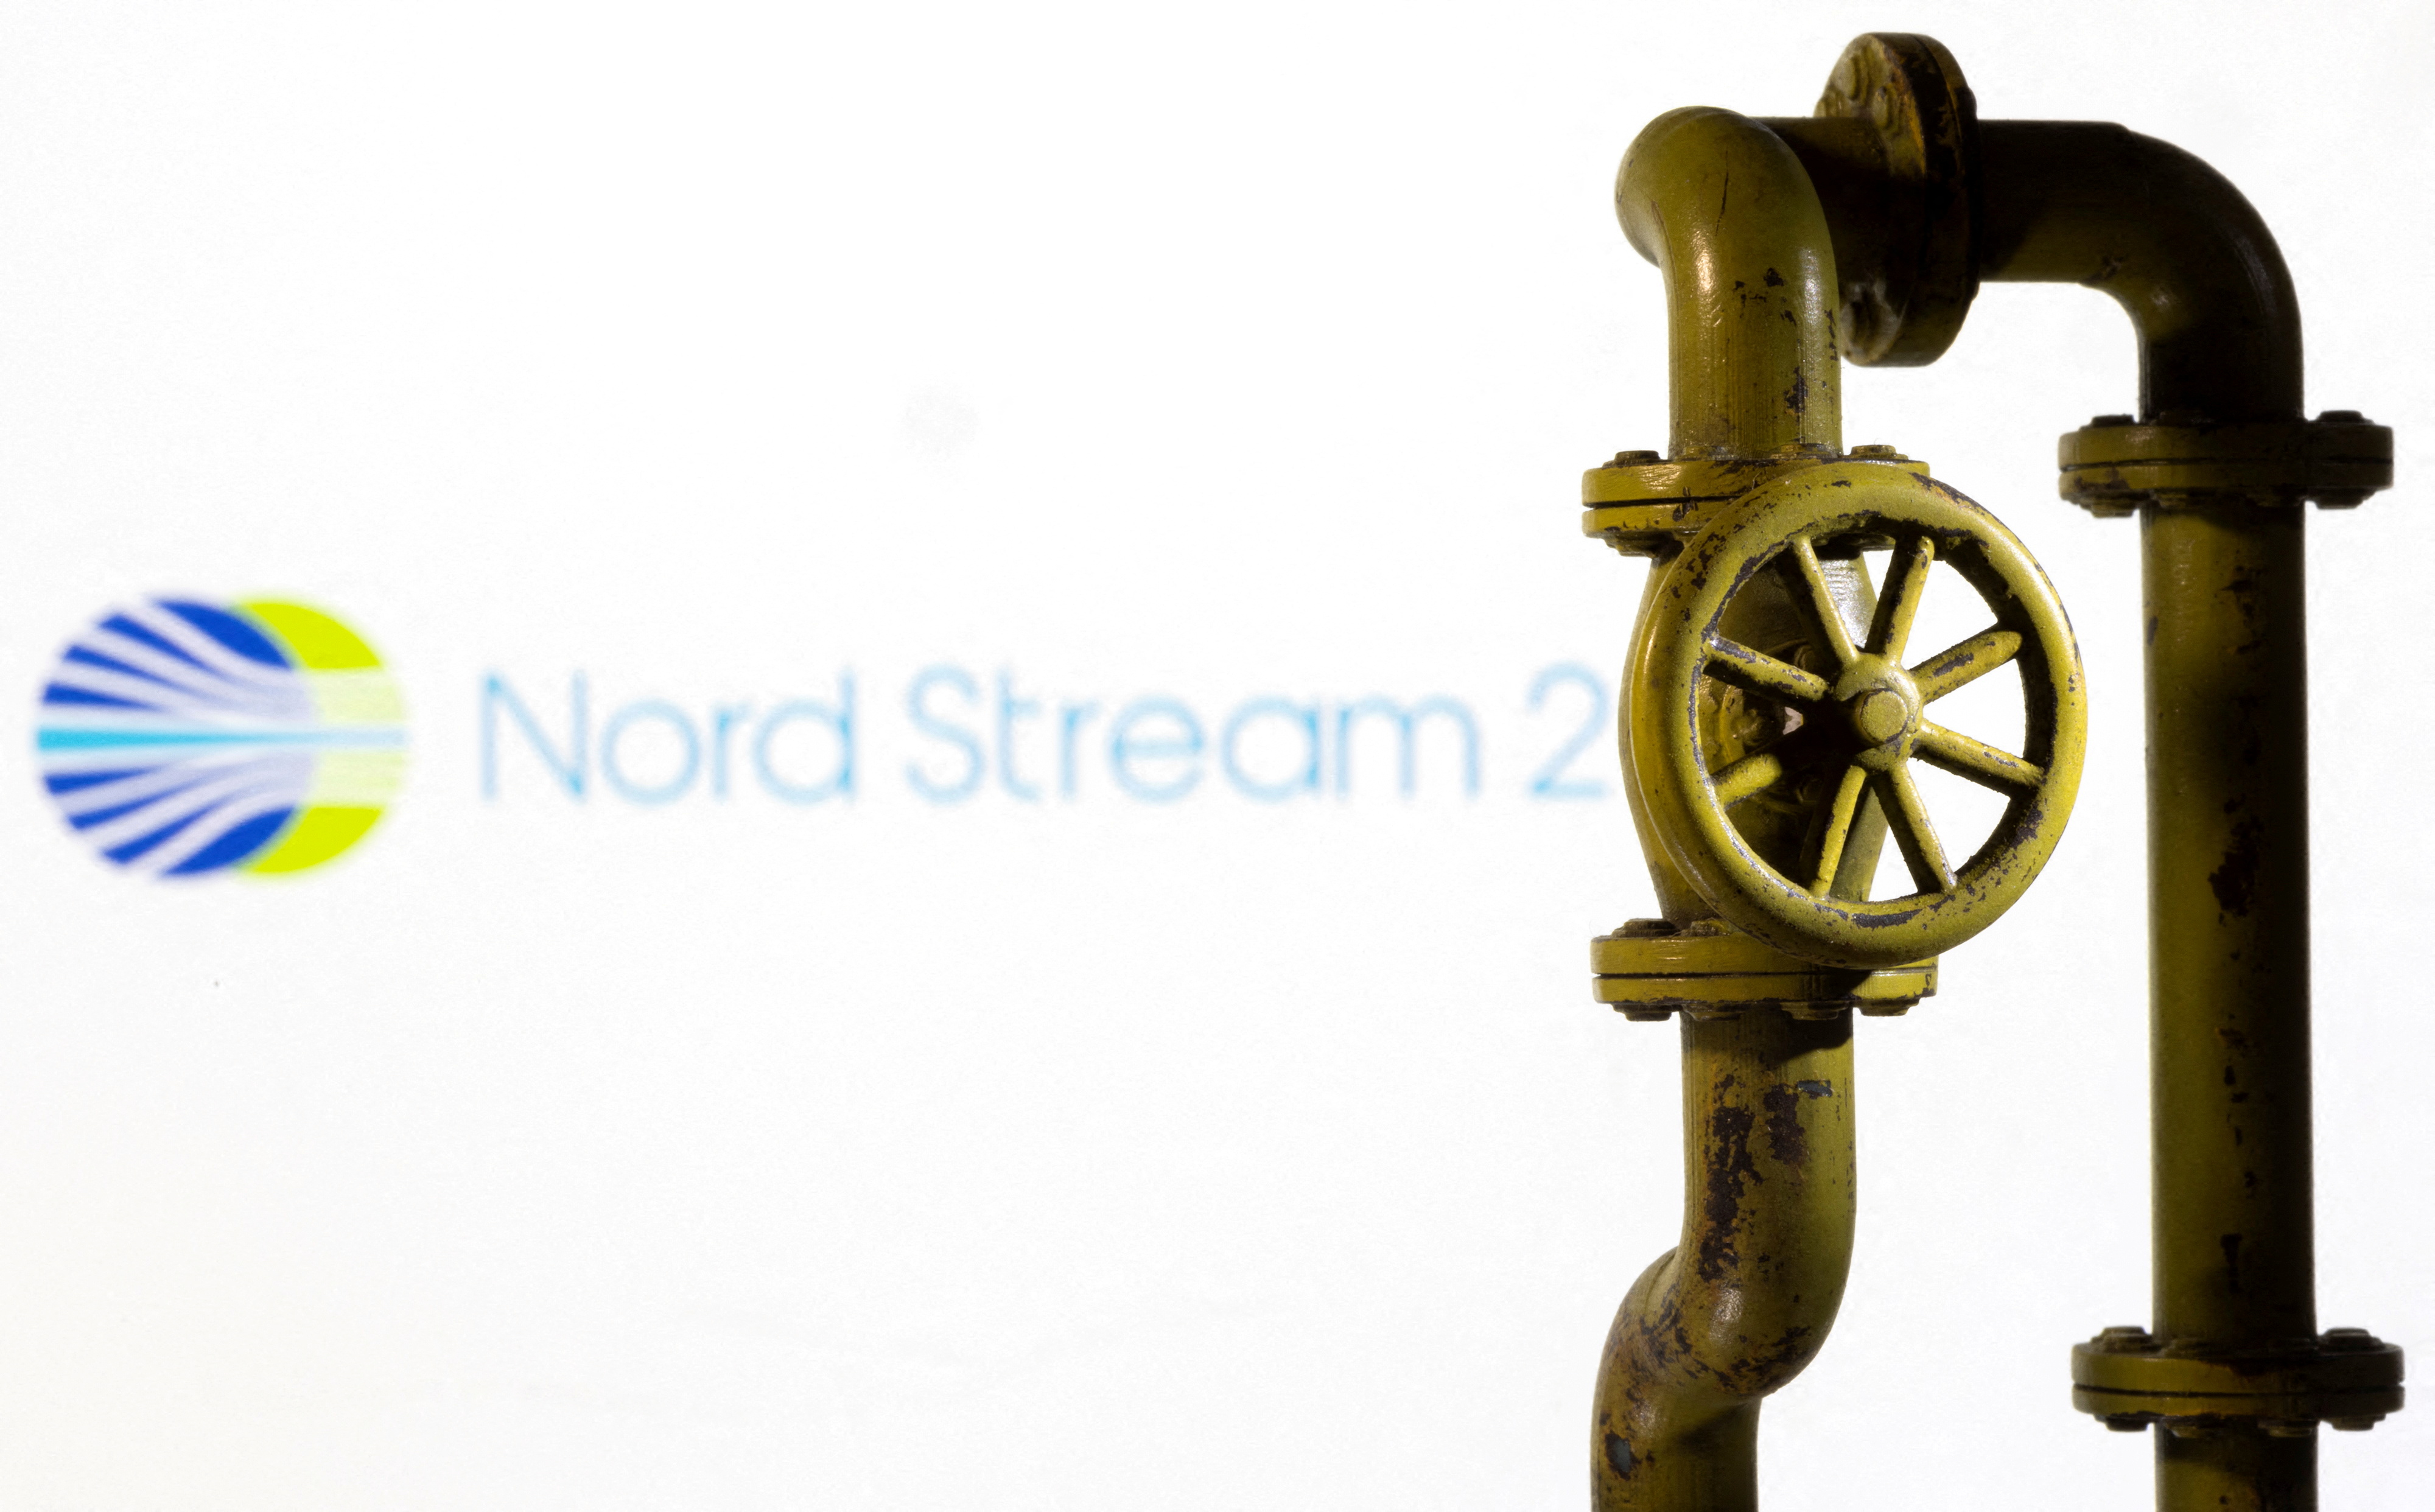 Illustration shows Nord Stream 2 logo and natural gas pipeline